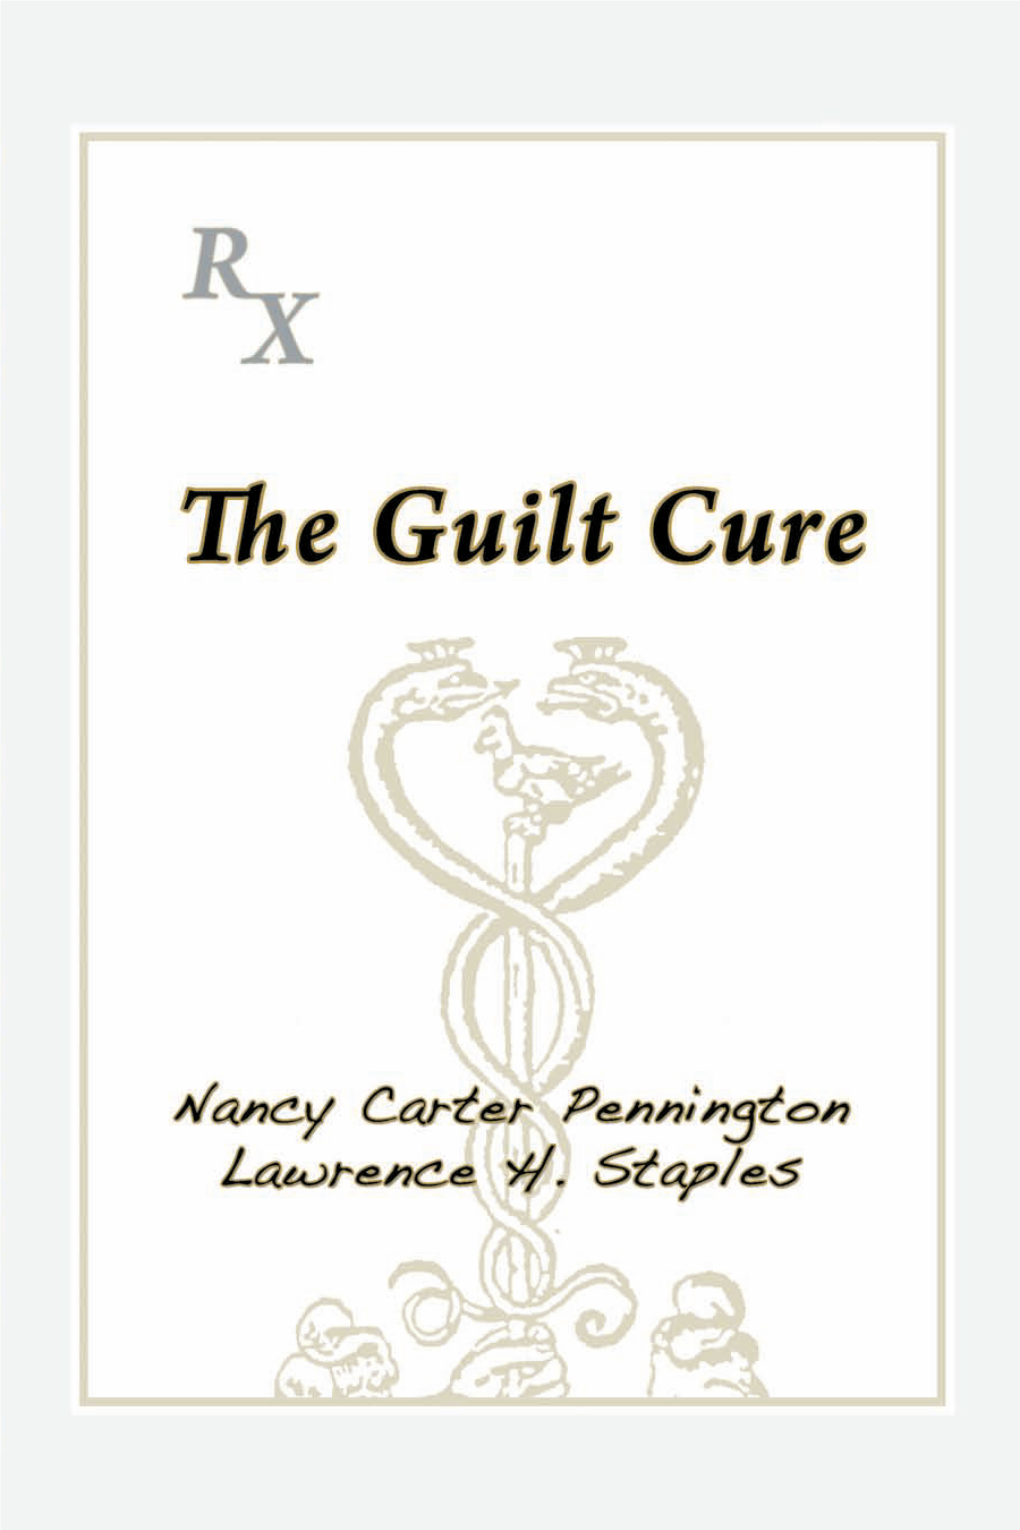 The Guilt Cure Addresses Spiritual and Psychological Means to Discover, Treat, and Expiate Guilt and Its Neurotic Counterparts